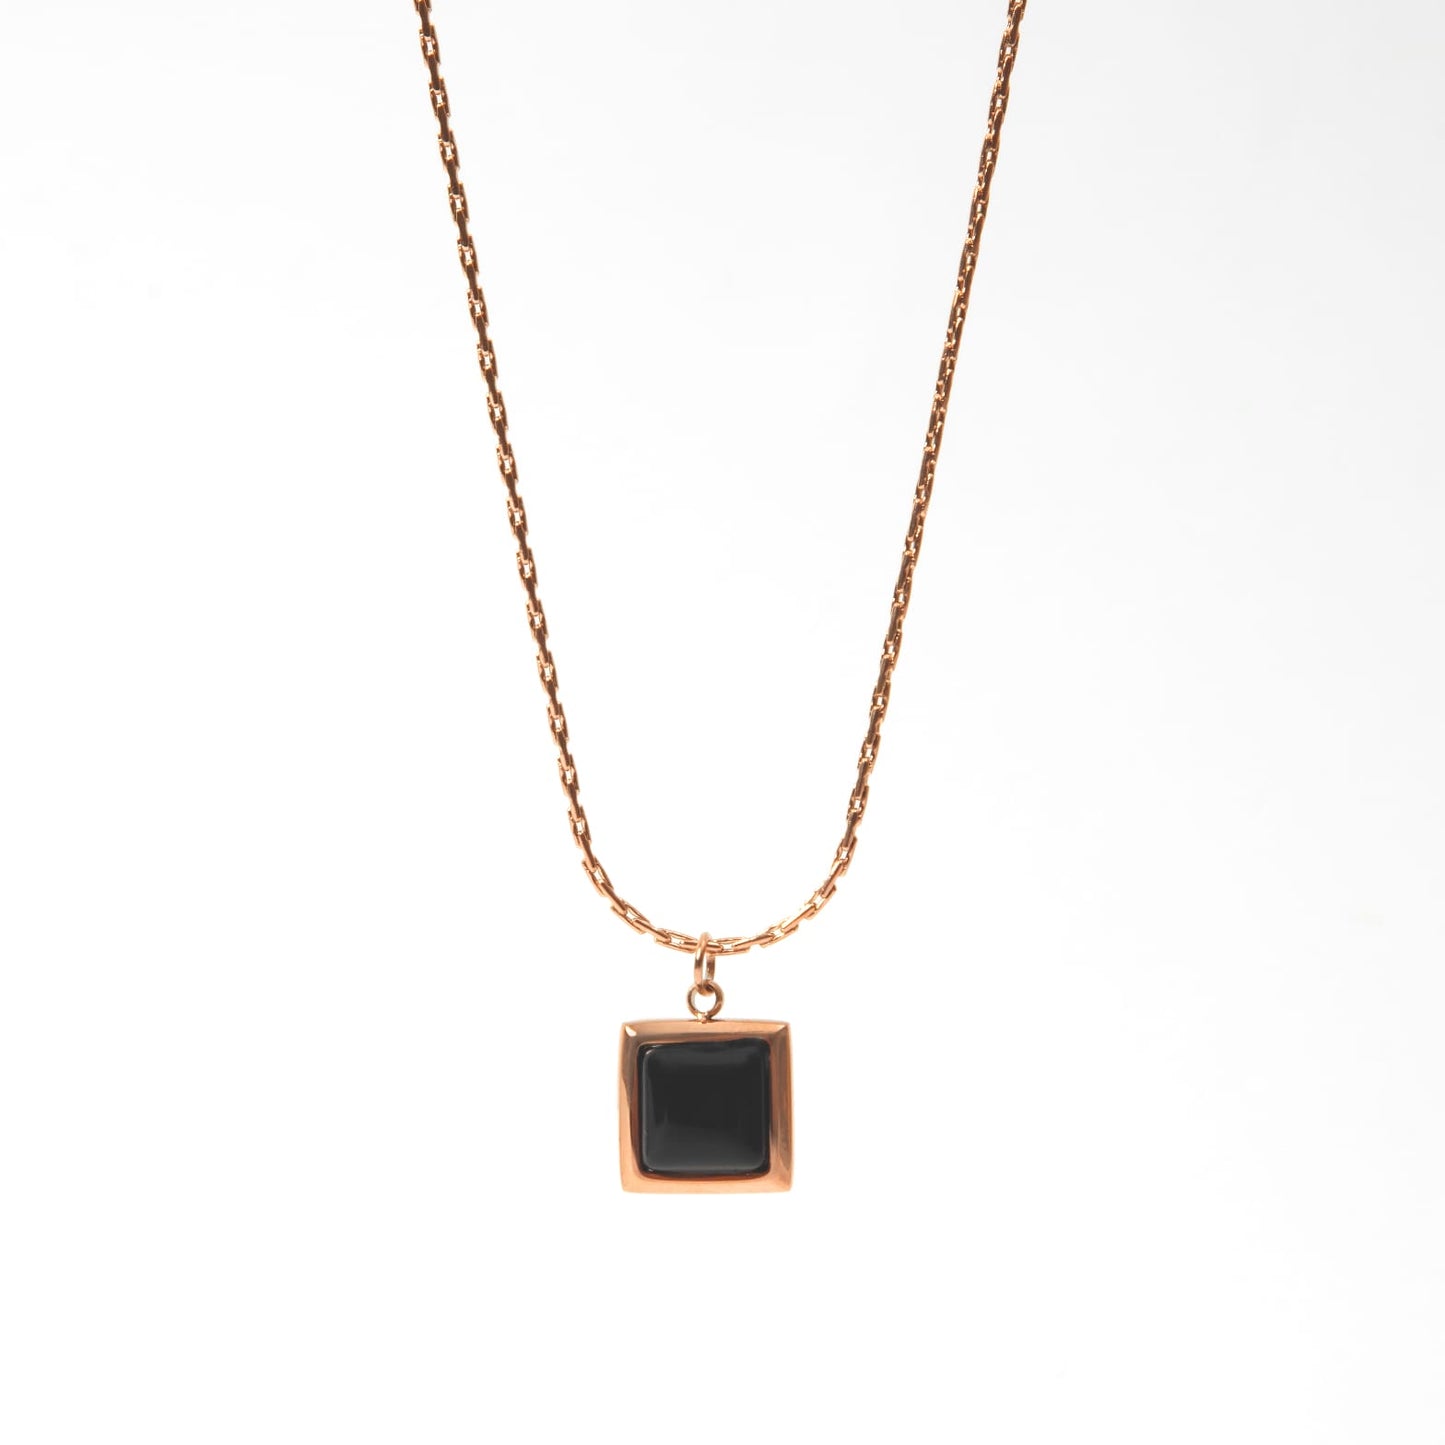 GOLDEN BOLD BLACK SQUARE WITH LINK CHAIN PENDANT